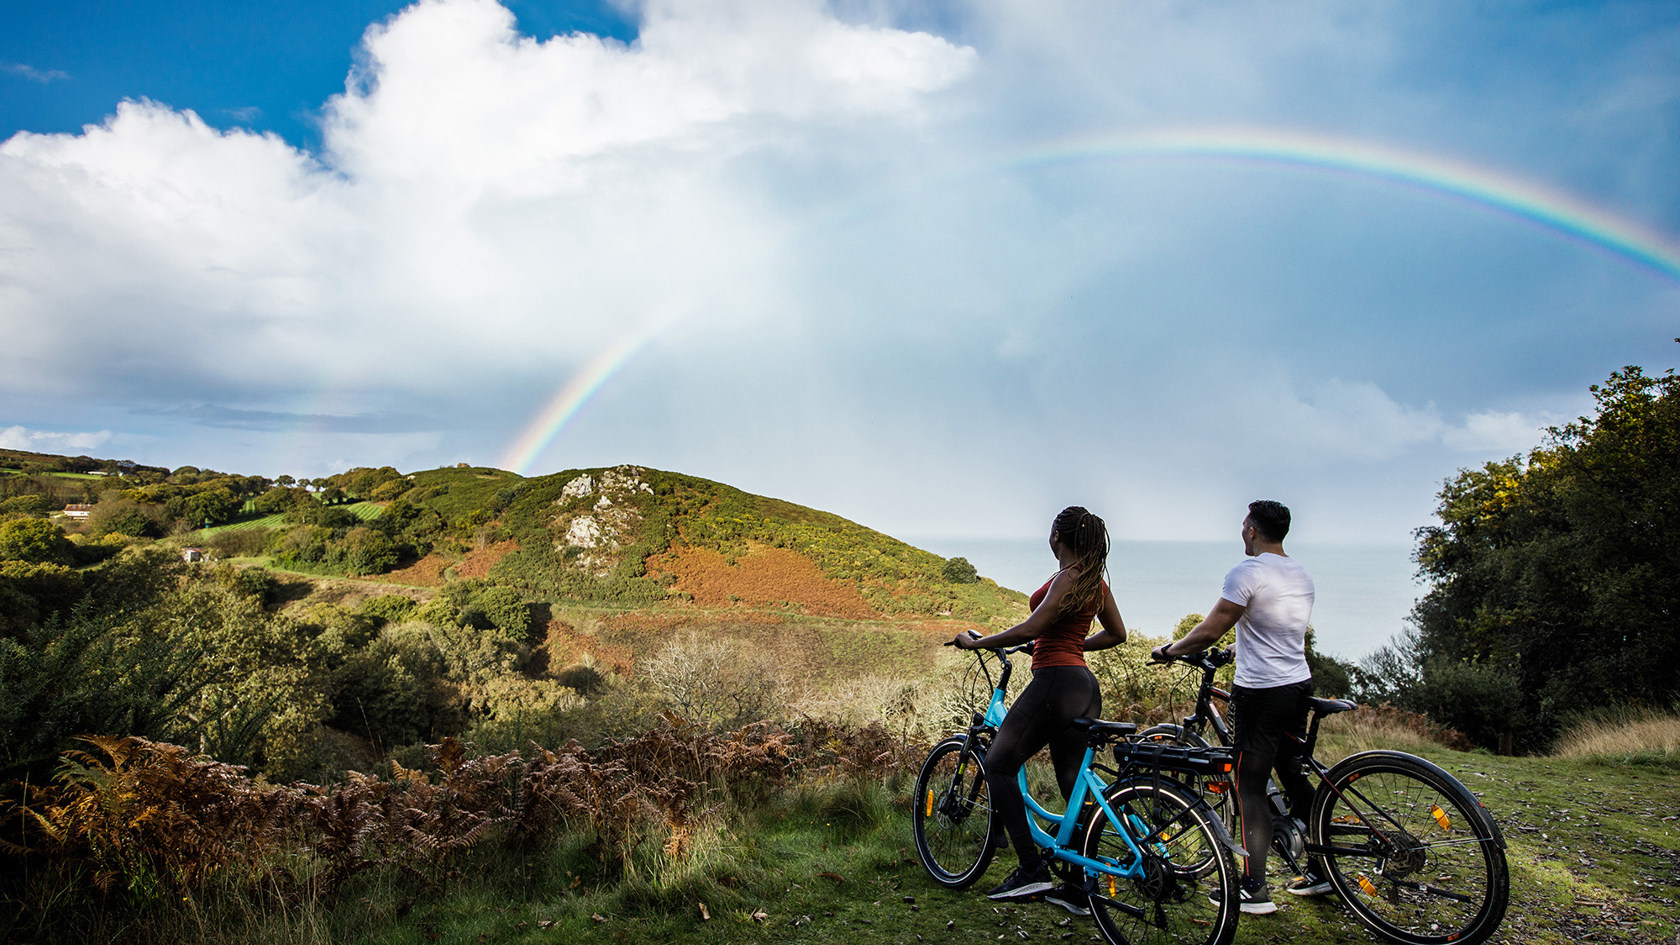 A man and a women look at a rainbow while riding electric bicycles.